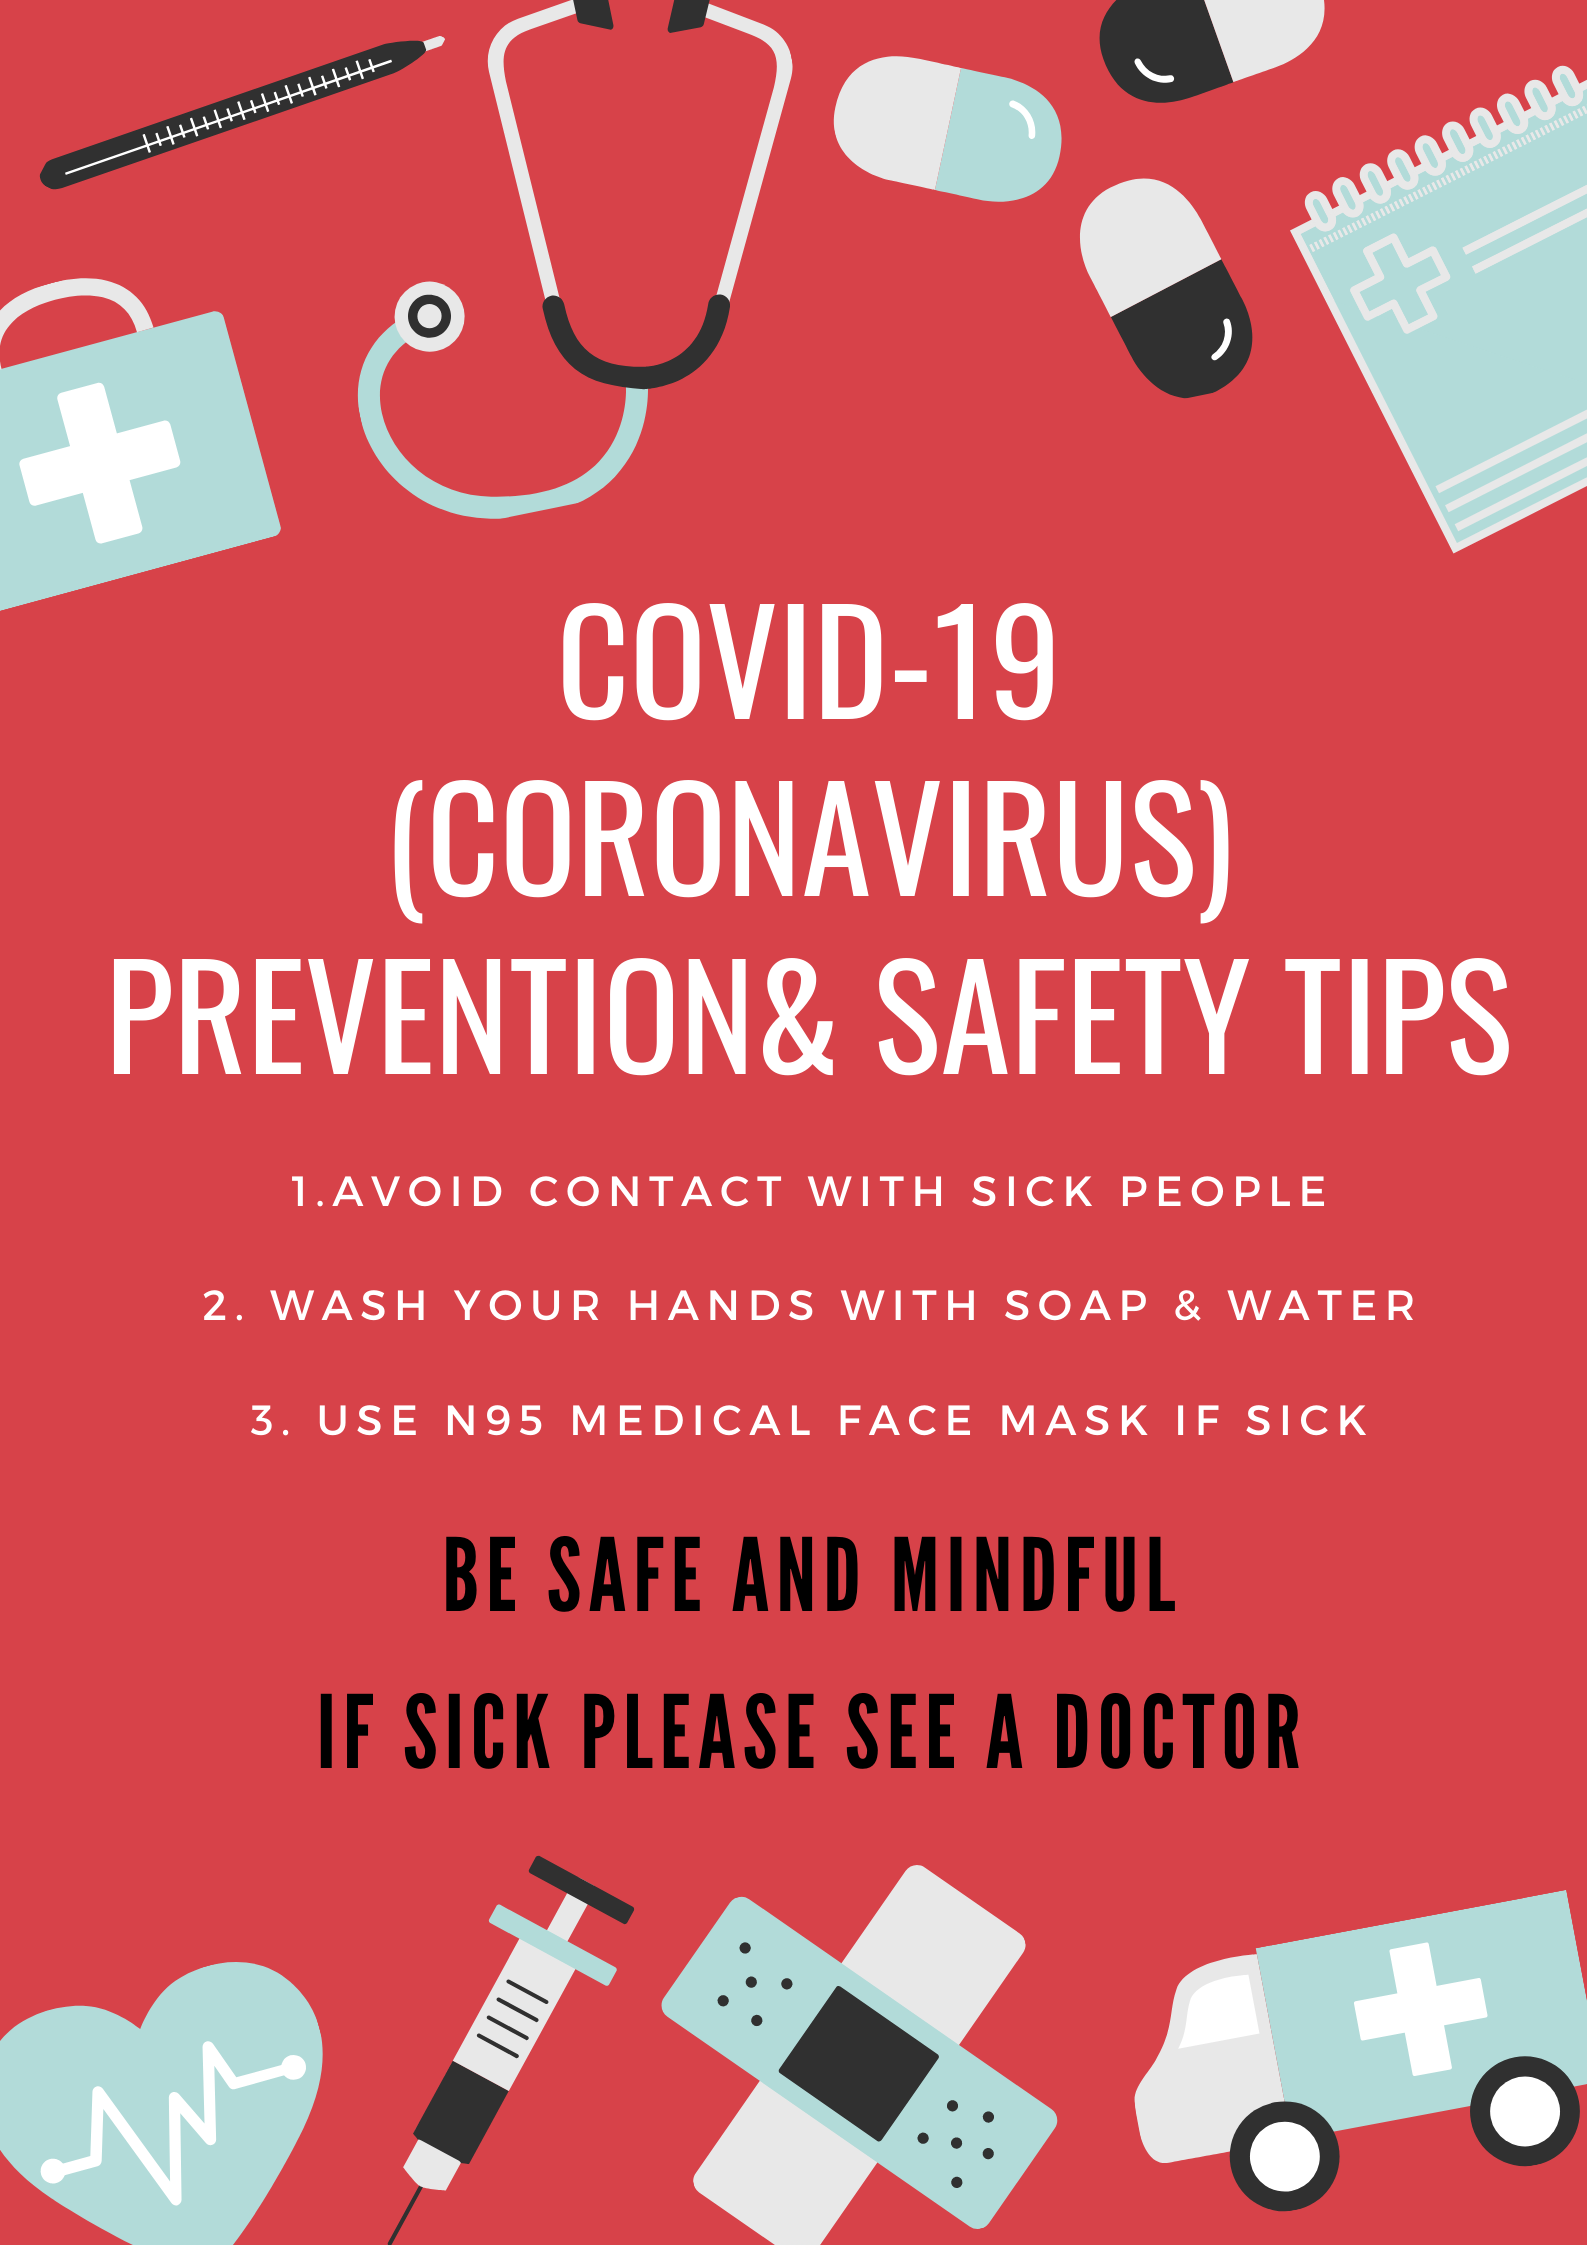 Coronavirus Safety Tips For Our Community